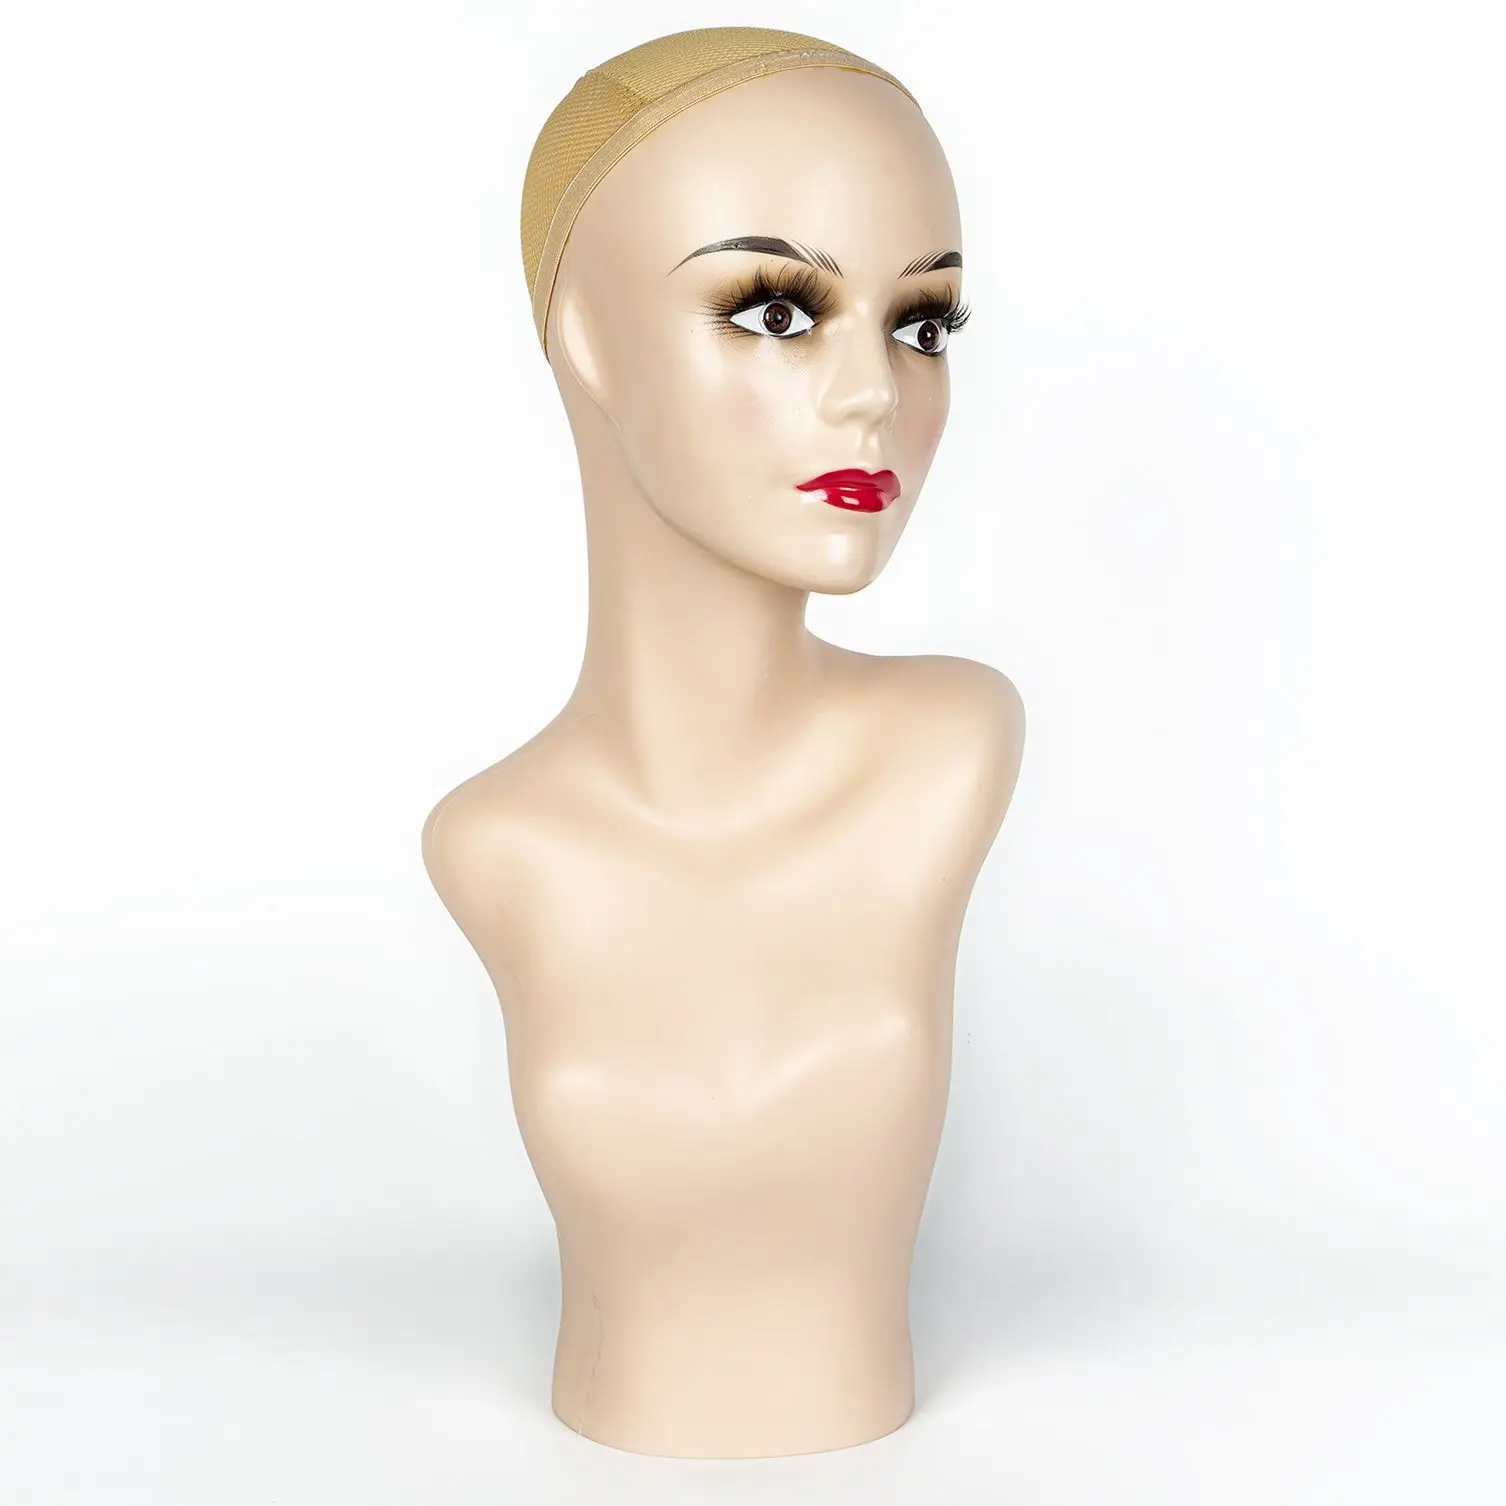 

Bald Mannequin Head Bust Model Display Wigs Accessories Practice Cosmetology Model Stand Make Hats Wigs